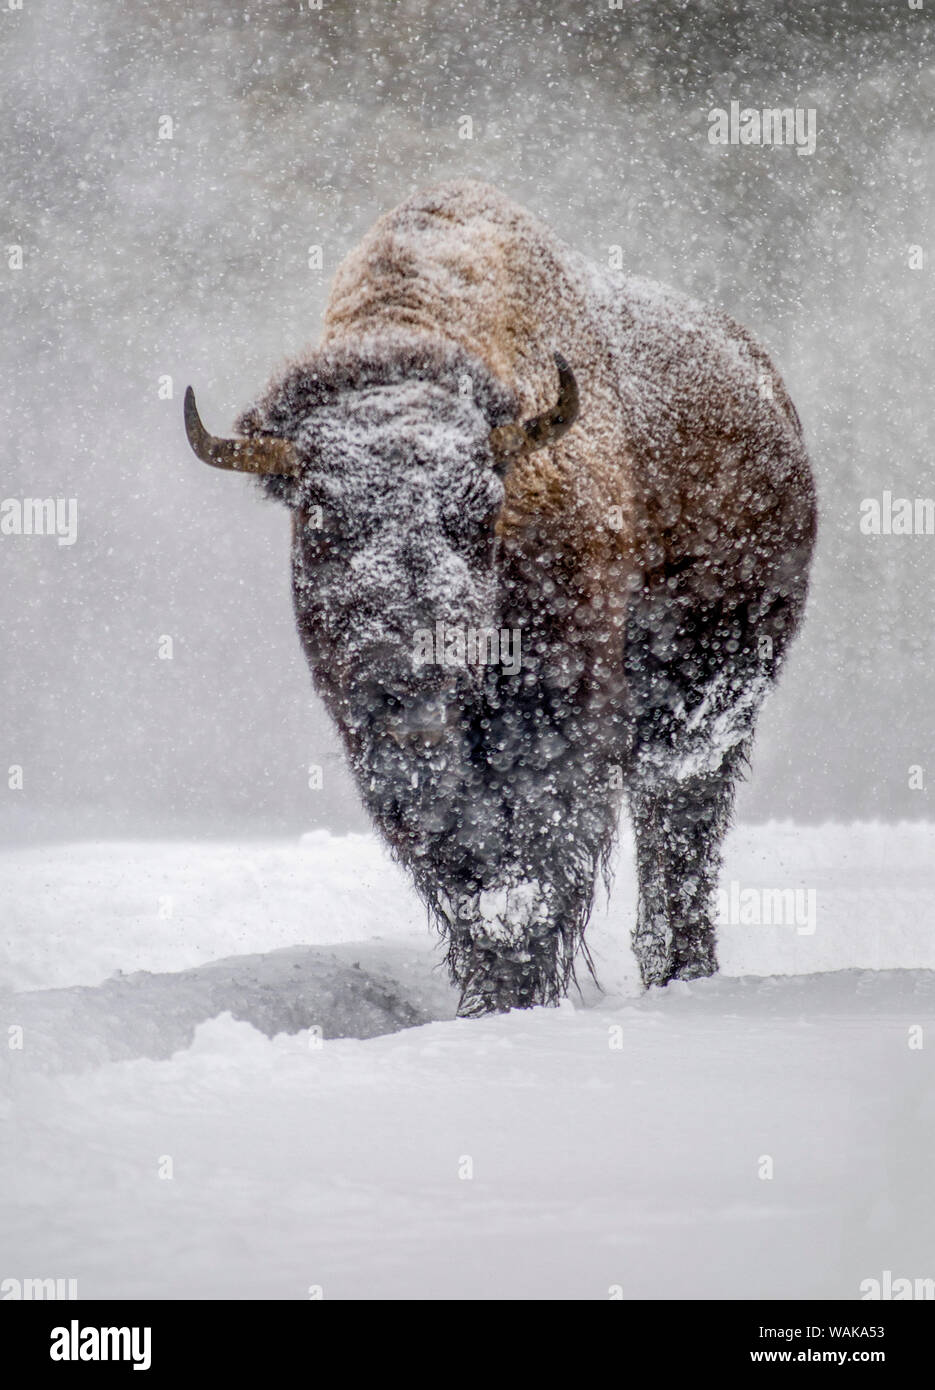 USA, Yellowstone National Park. One bison during winter. Stock Photo